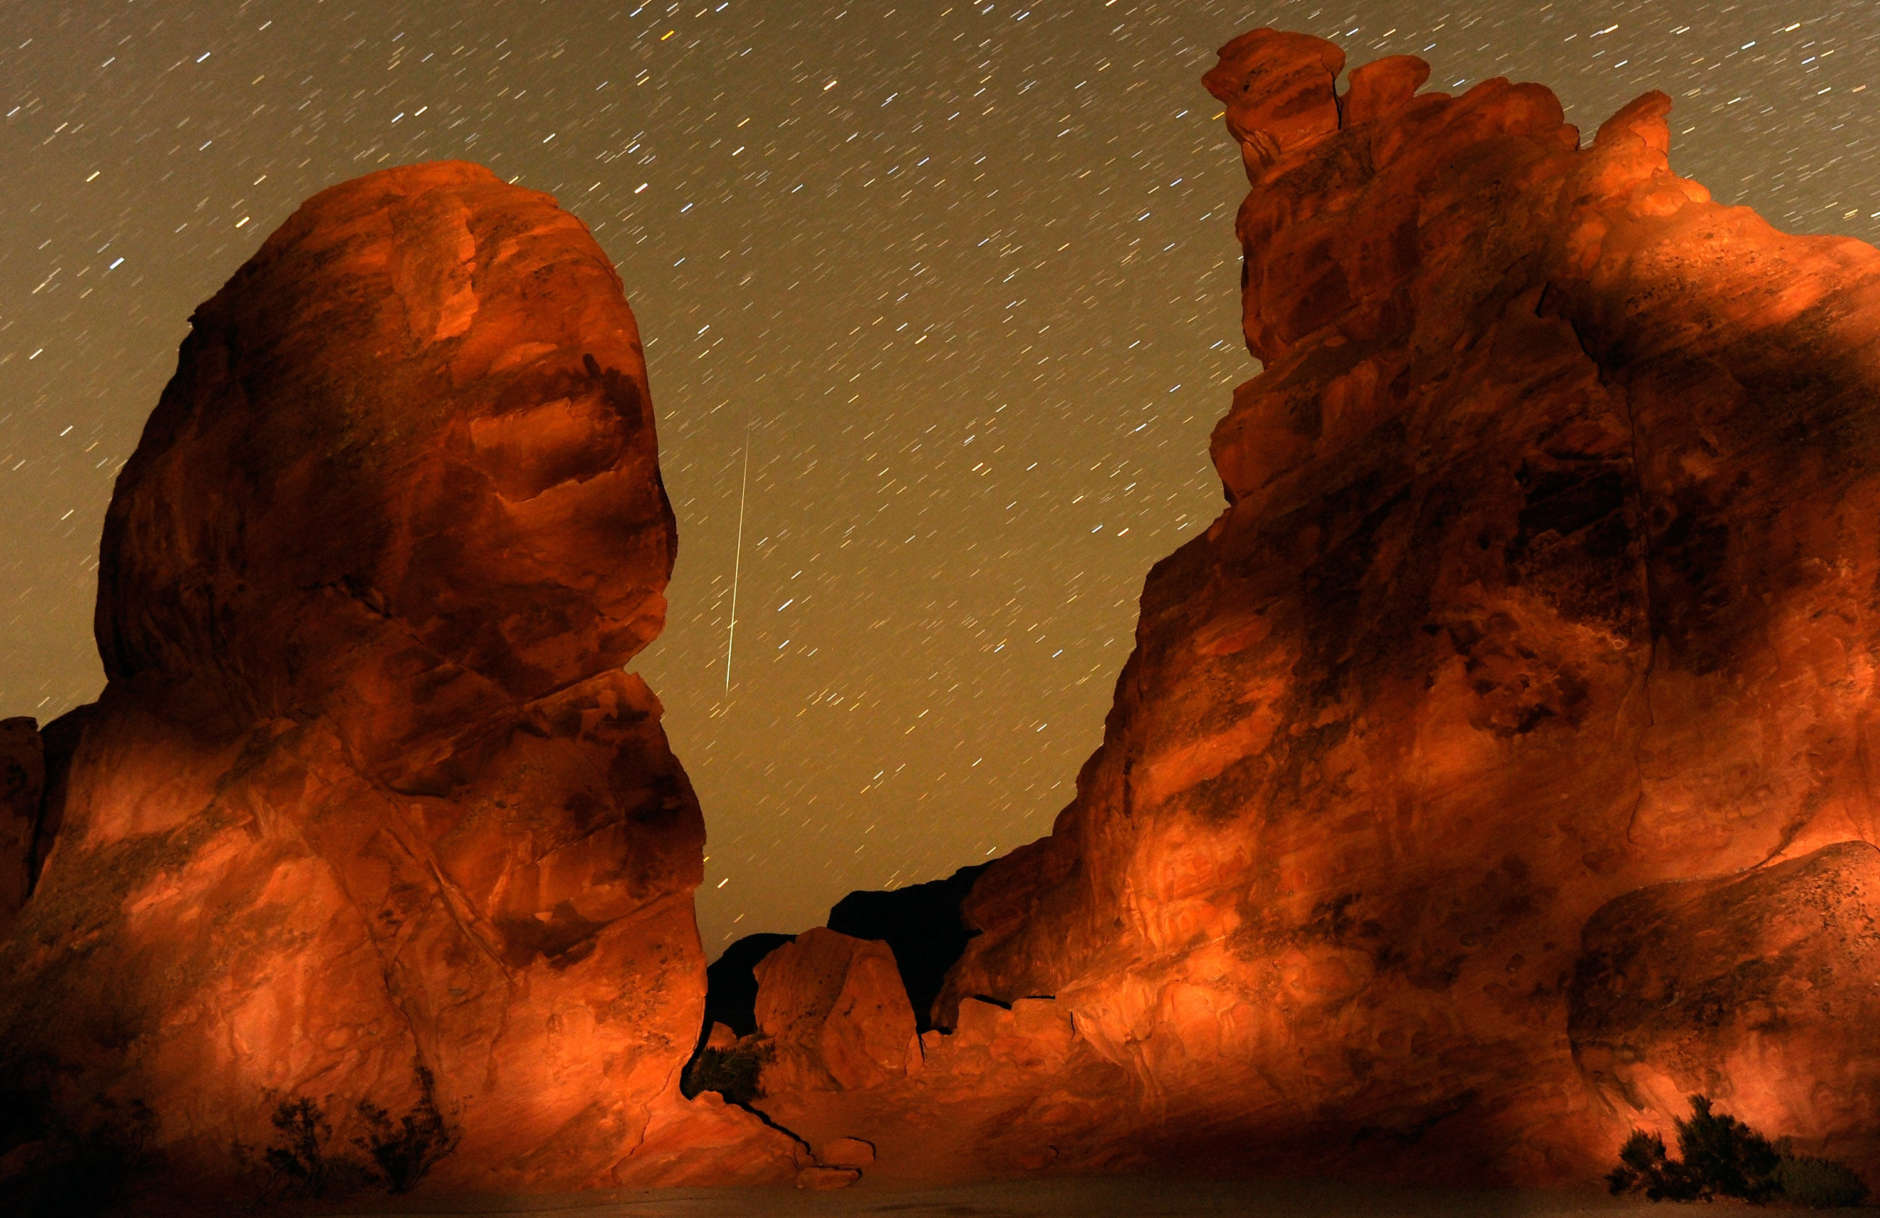 A Geminid meteor streaks between peaks of the Seven Sisters rock formation early December 14, 2010 in the Valley of Fire State Park in Nevada. The meteor display, known as the Geminid meteor shower because it appears to radiate from the constellation Gemini, is thought to be the result of debris cast off from an asteroid-like object called 3200 Phaethon. The shower is visible every December.  (Photo by Ethan Miller/Getty Images)